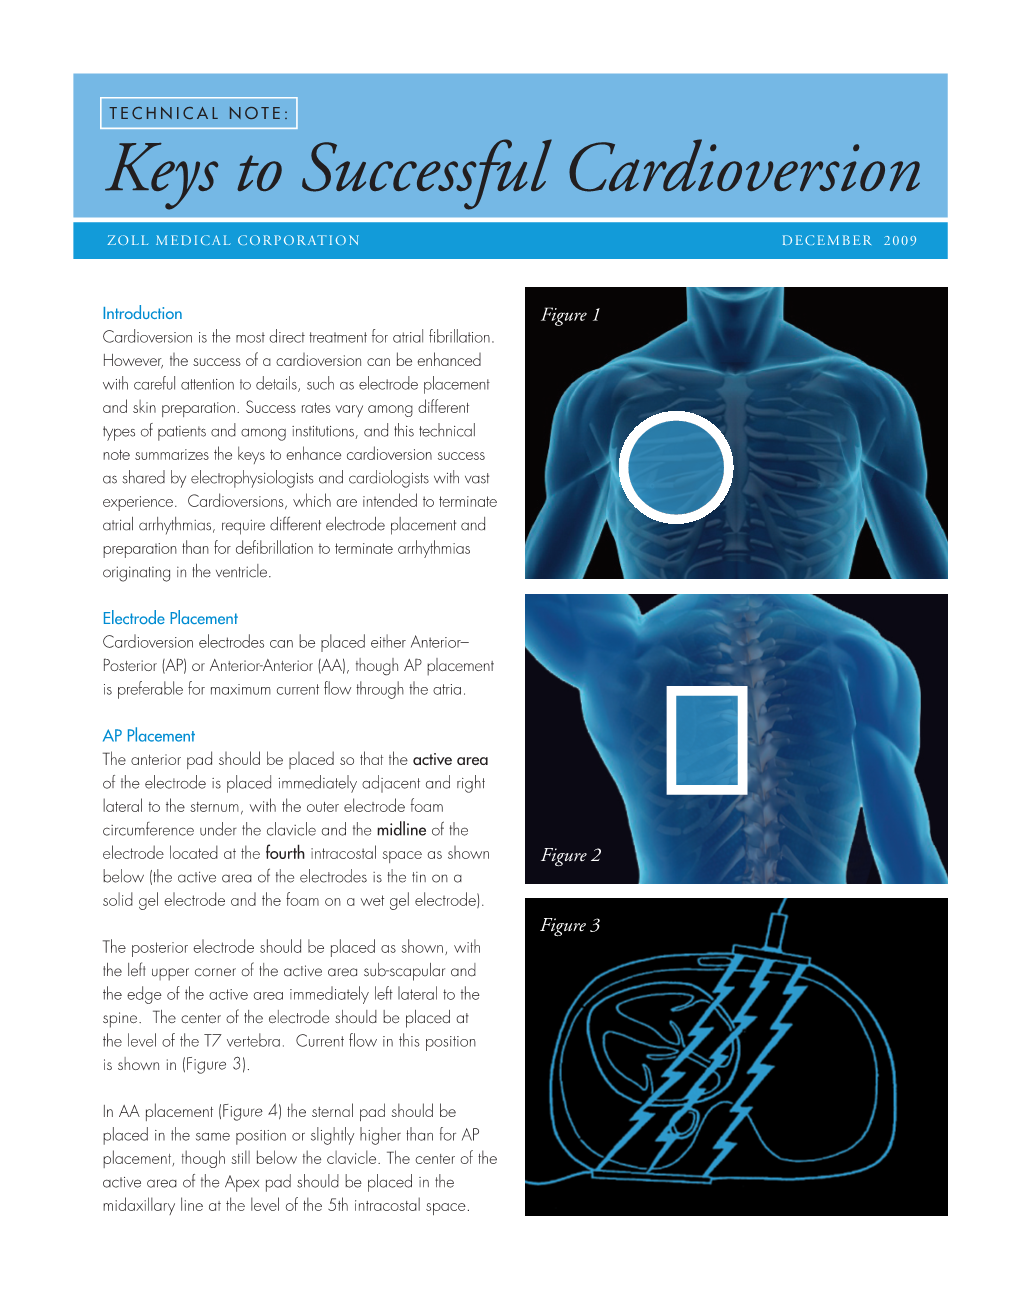 Keys to Successful Cardioversion